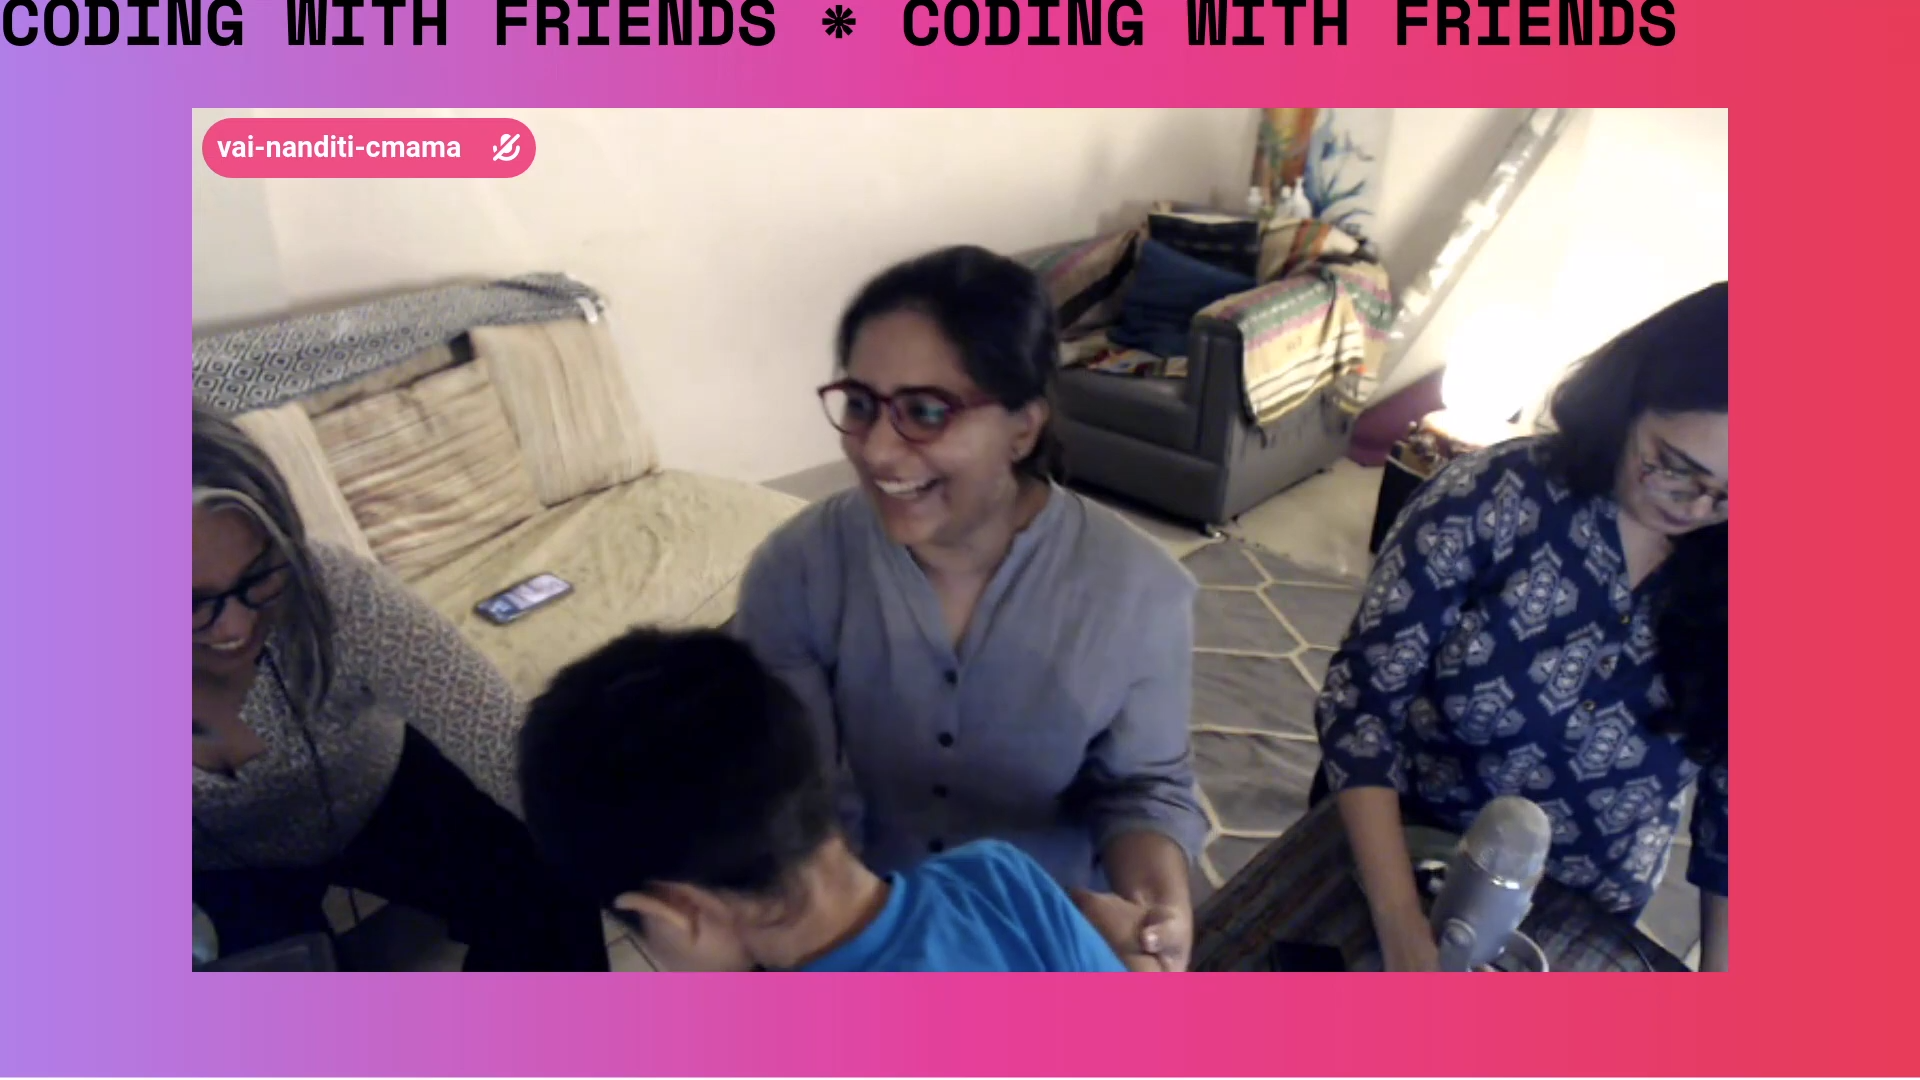 A screenshot showing three women smiling while the back of a young child appears in the centre of the image. The image appears over a pink and purple background.